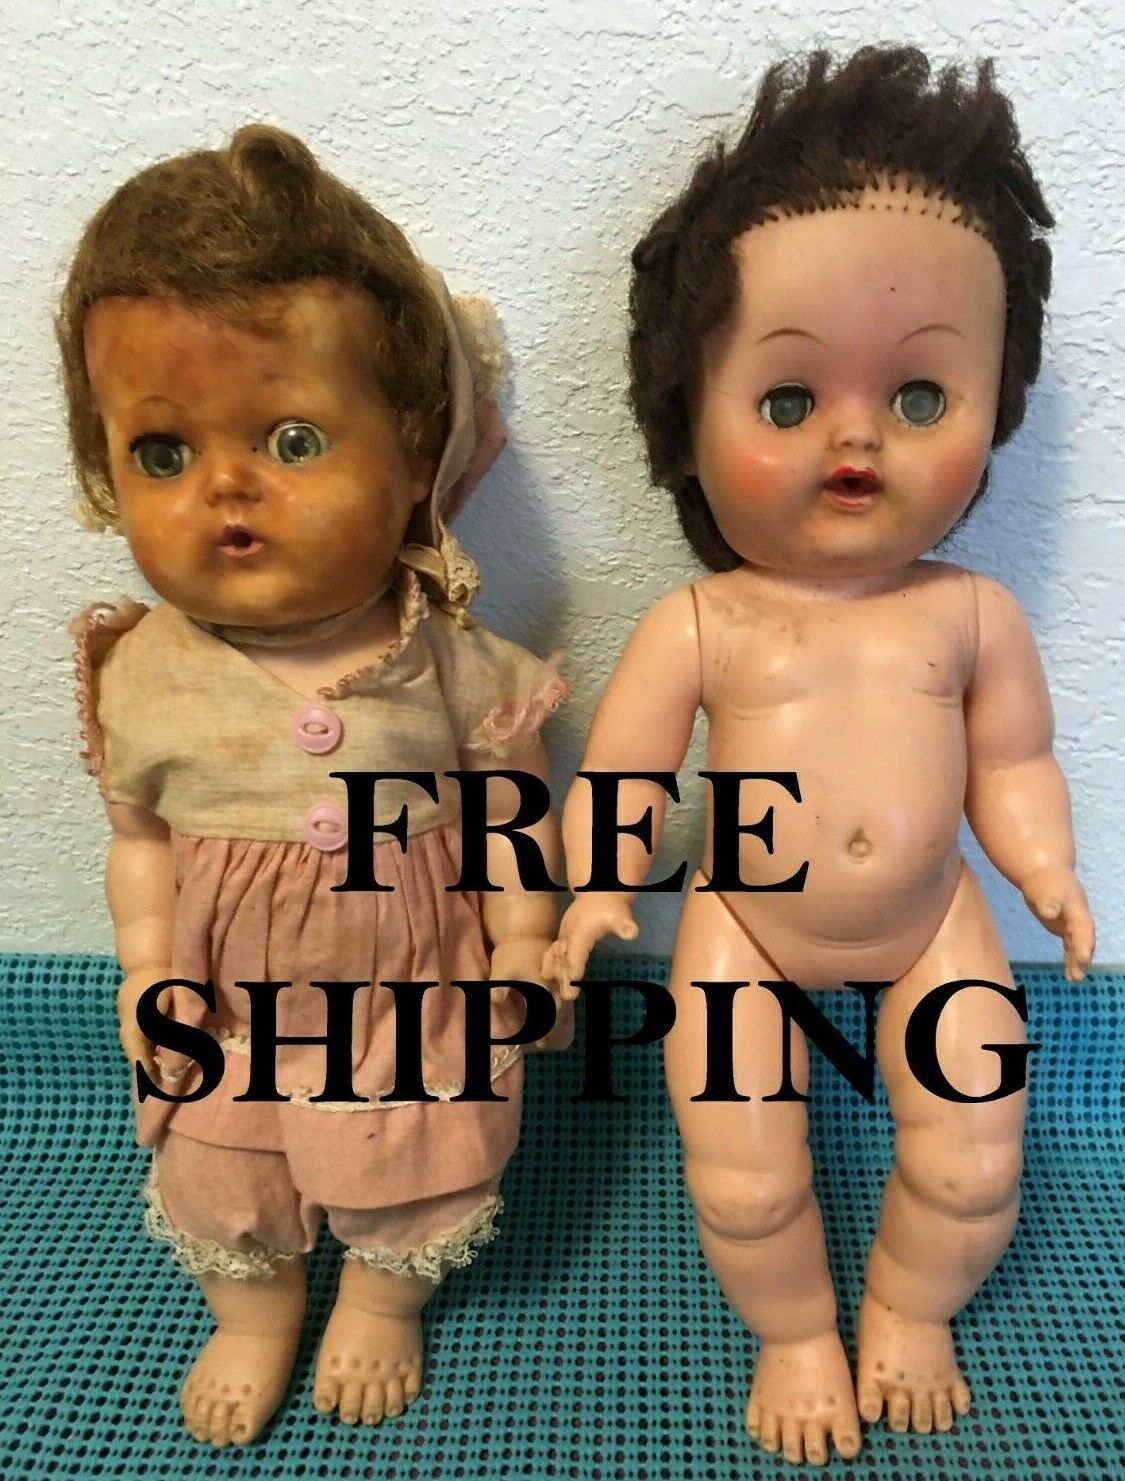 Two Vintage 1950's Tiny Tear's Dolls 11" ( Original Owner ) Dirty / Dusty